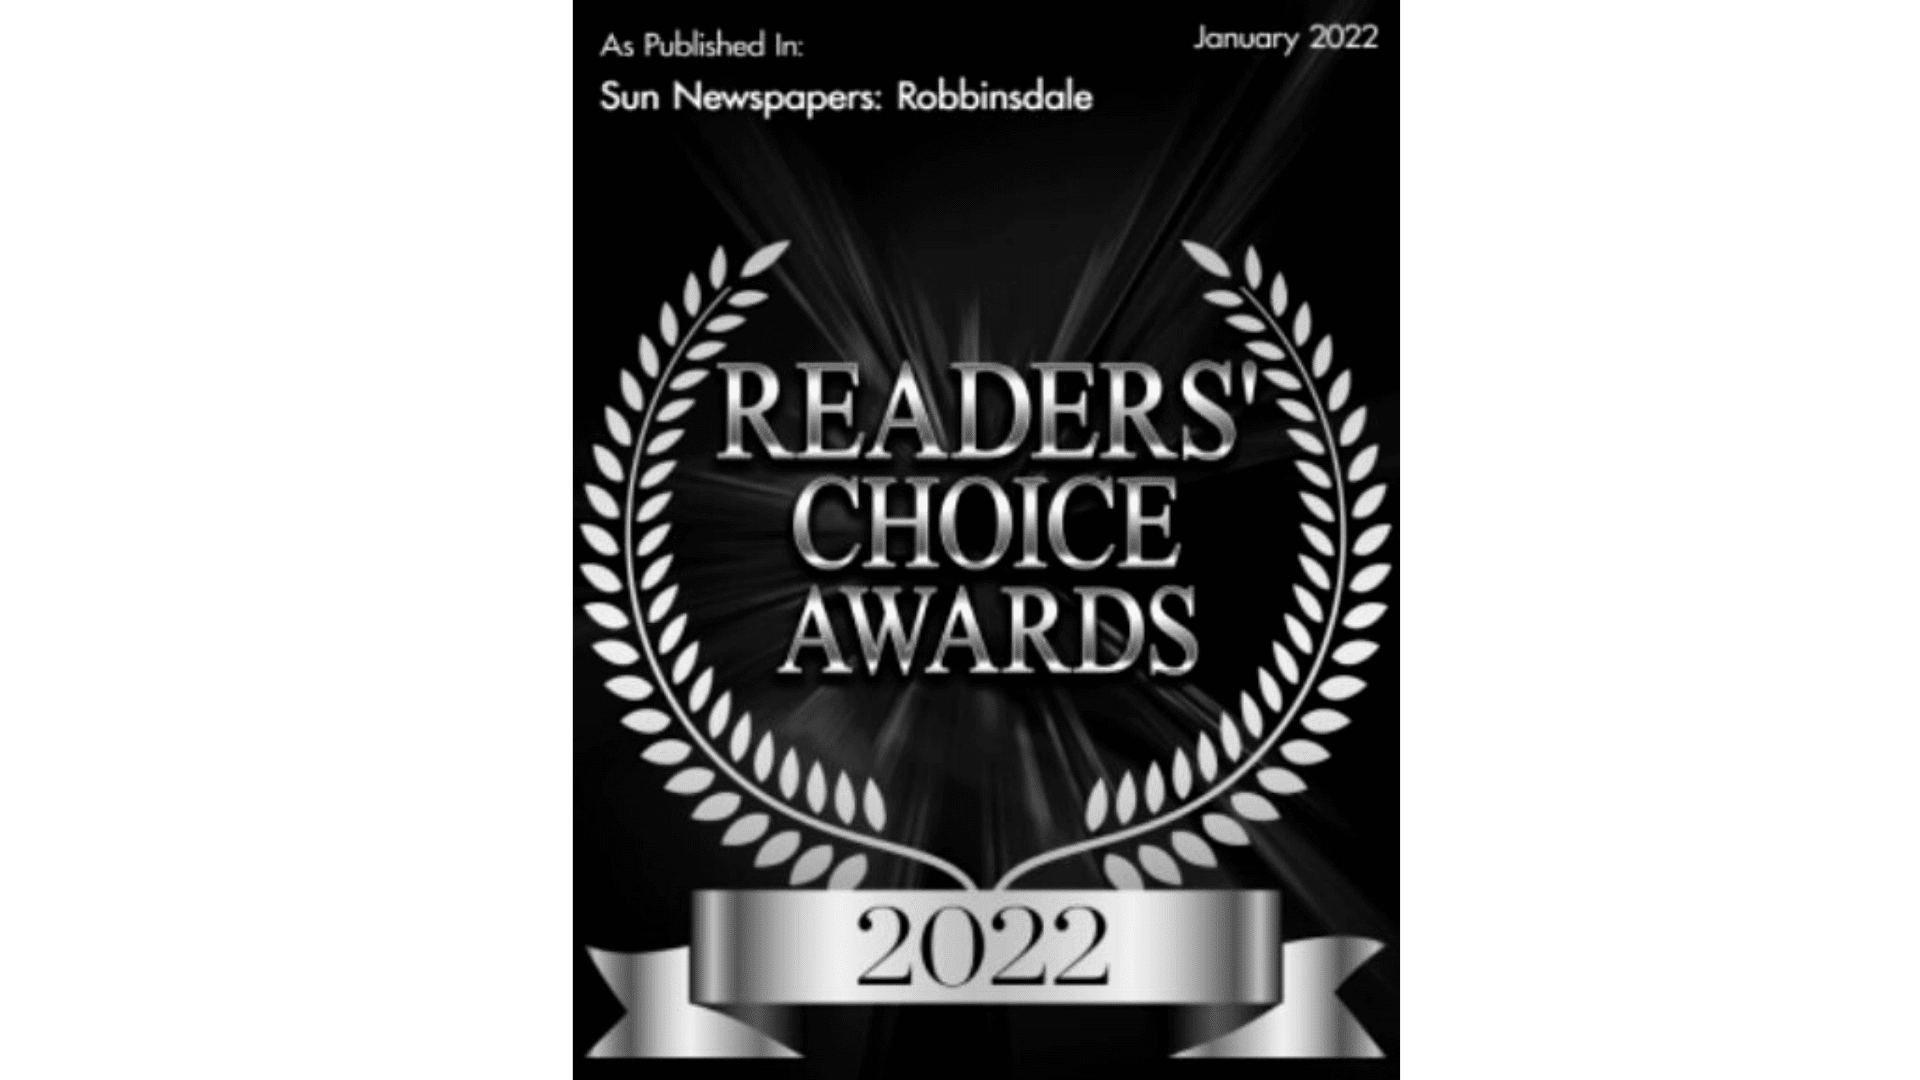 The reader's choice awards logo on a black background for house cleaning.